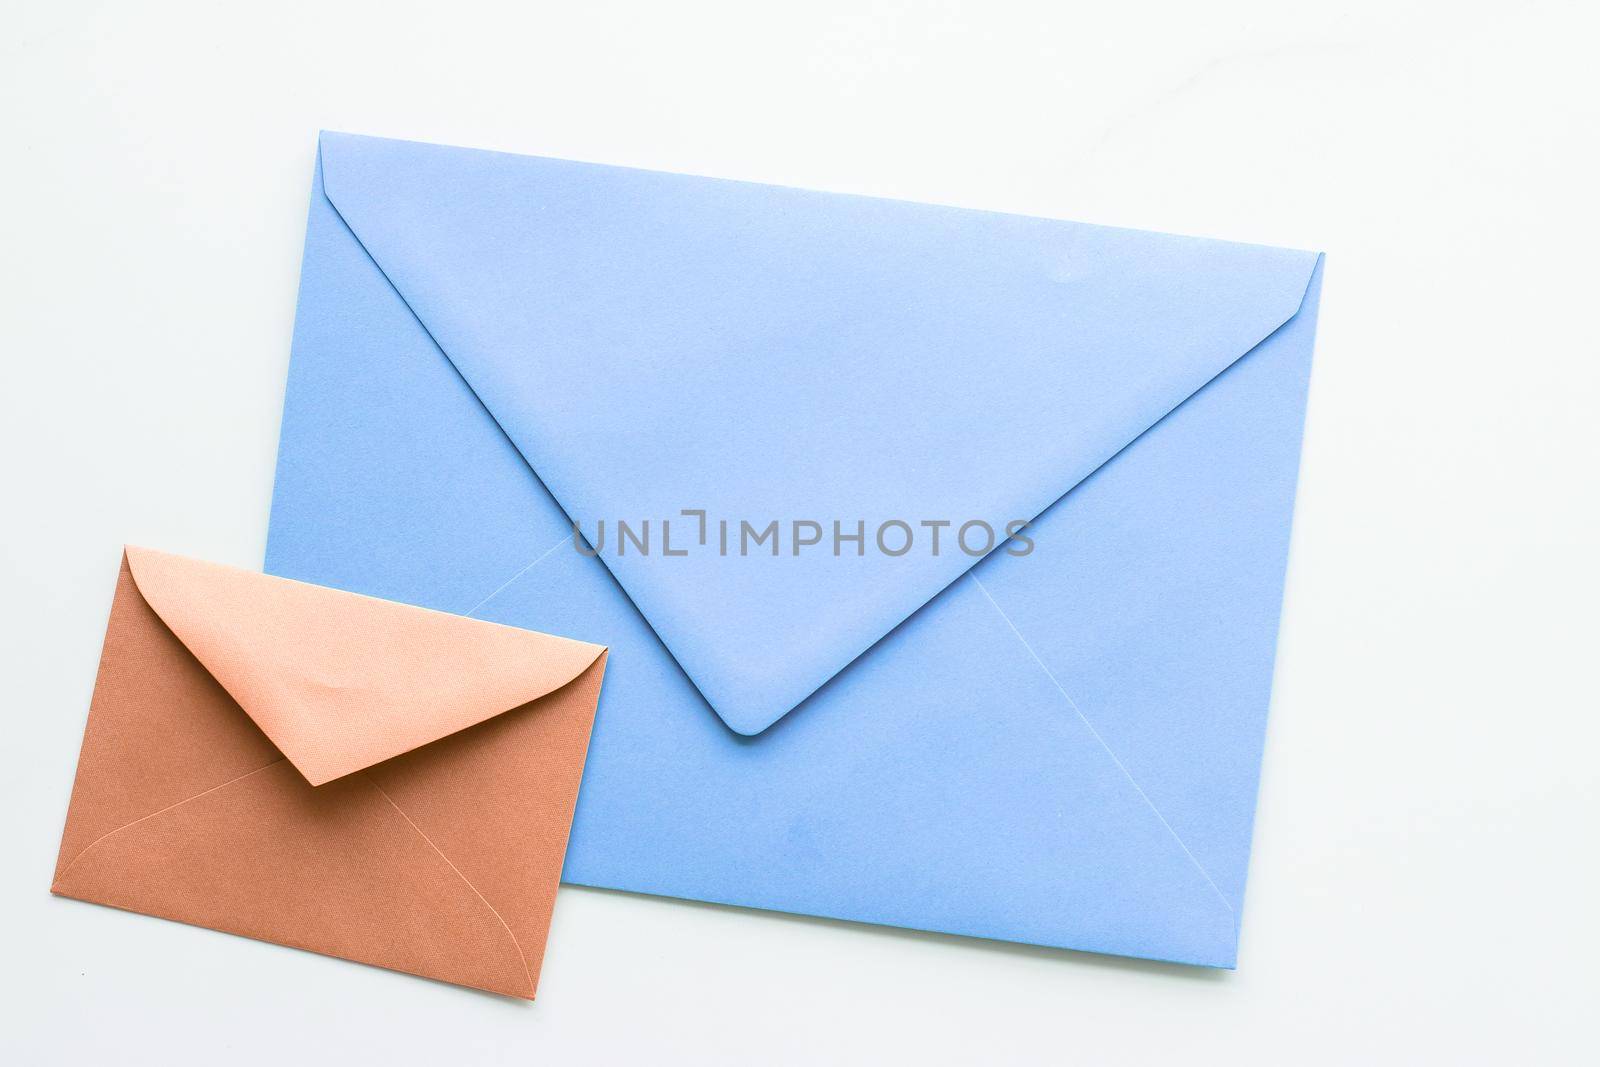 Postal service, newsletter and greeting card concept - Blank paper envelopes on marble flatlay background, holiday mail letter or post card message design